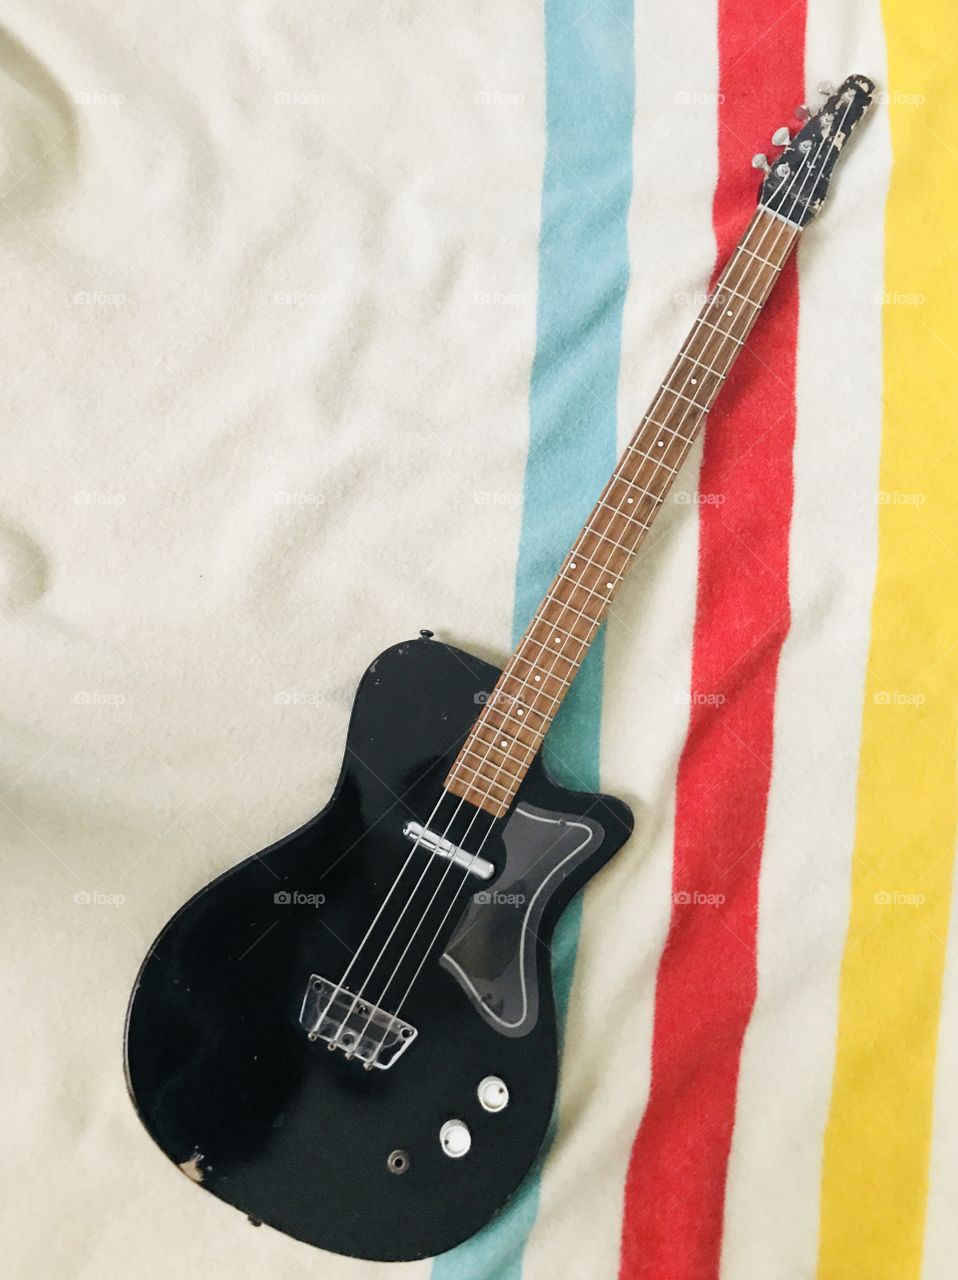 Vintage bass guitar: 1965 Silvertone 1466, Black, on top of a classic retro Hudson’s Bay Company blanket